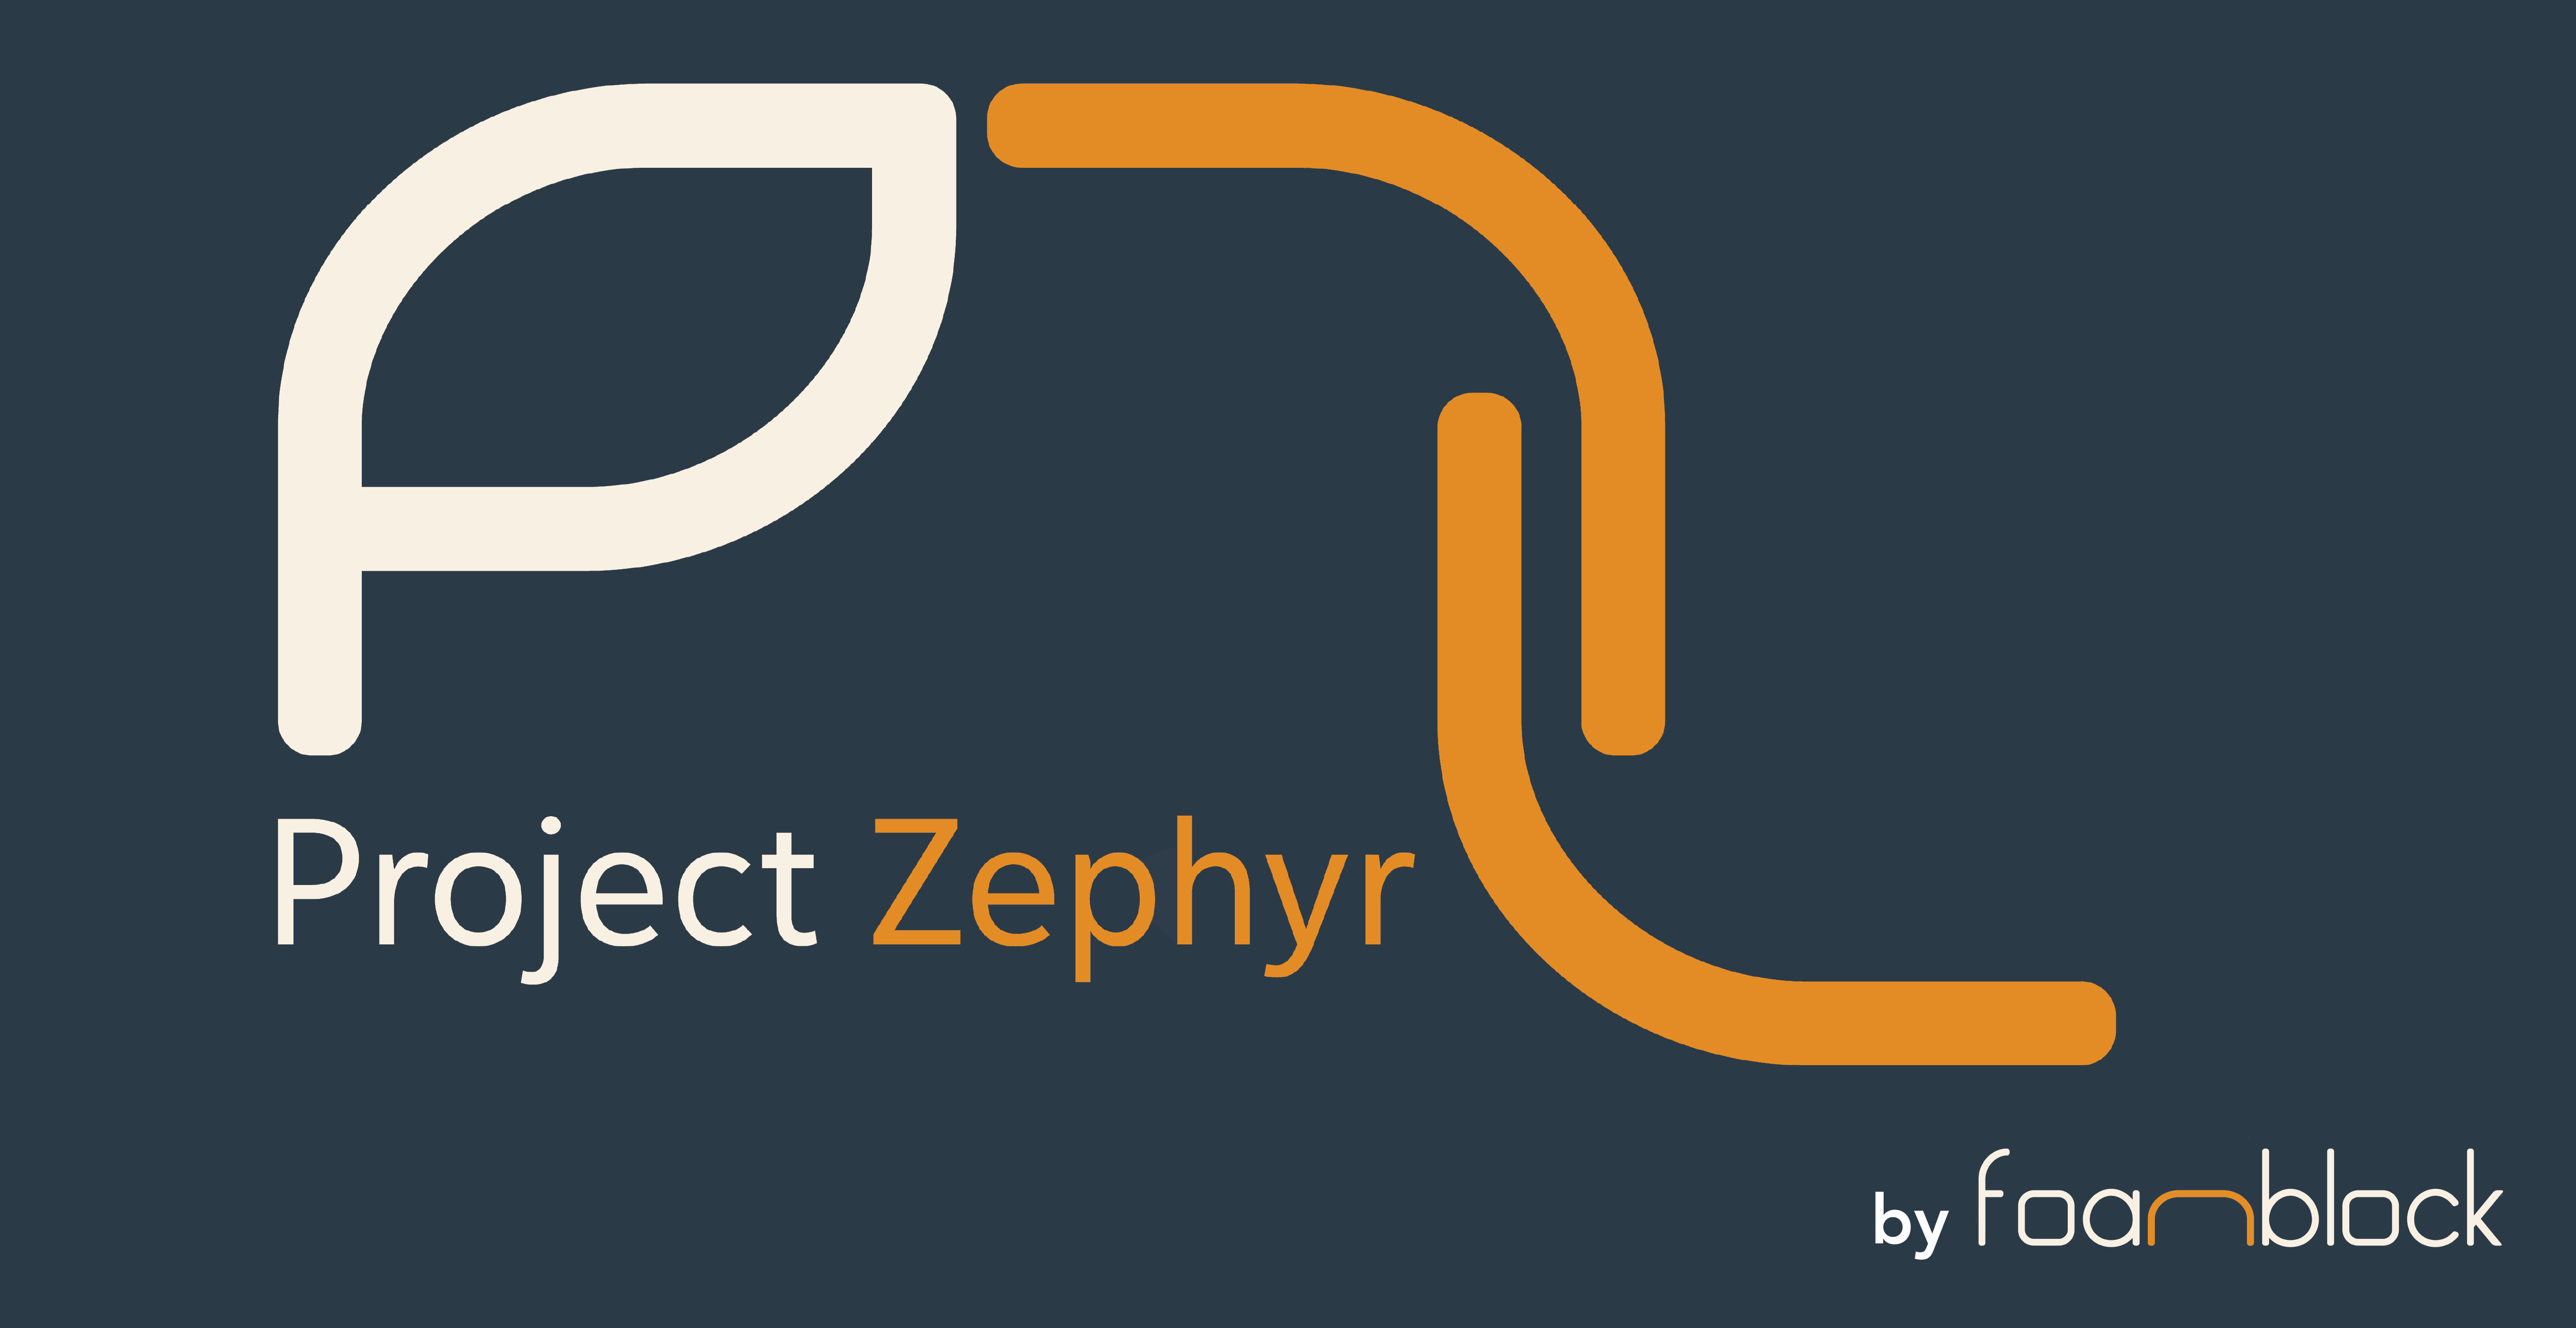 Project Zephyr